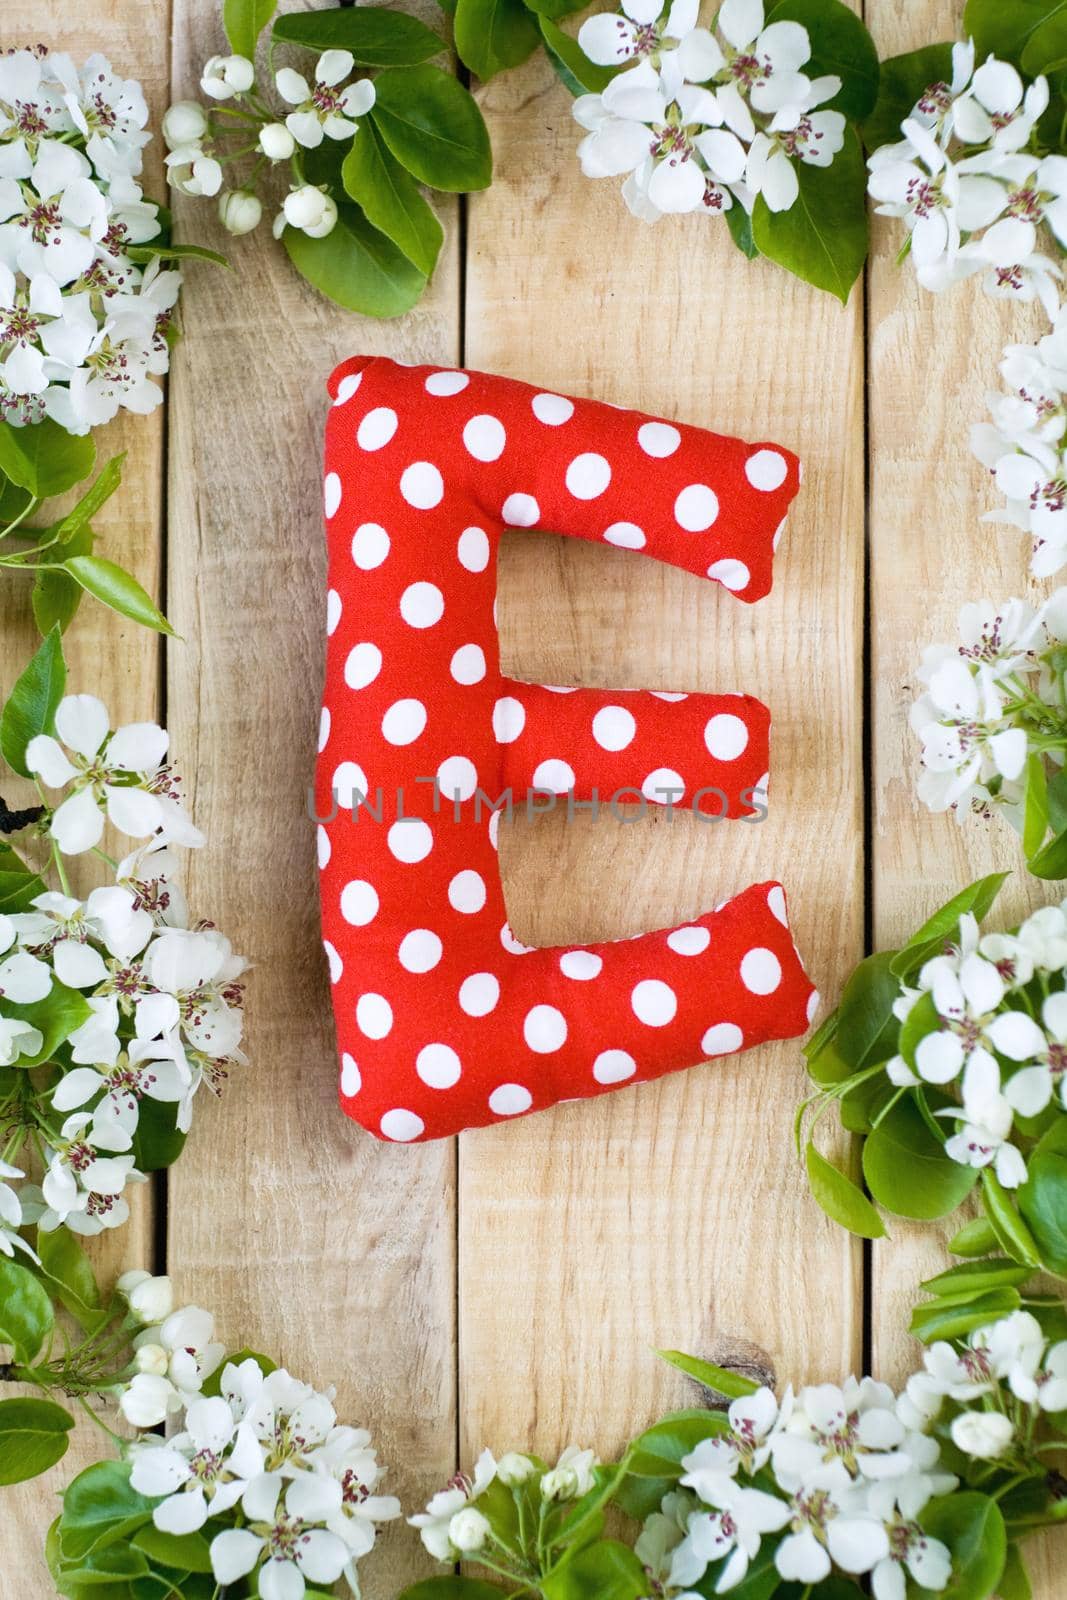 Natural wooden background with white flowers fruit tree. In the middle is the letter E, is made of red polka dot fabric. by Myrka